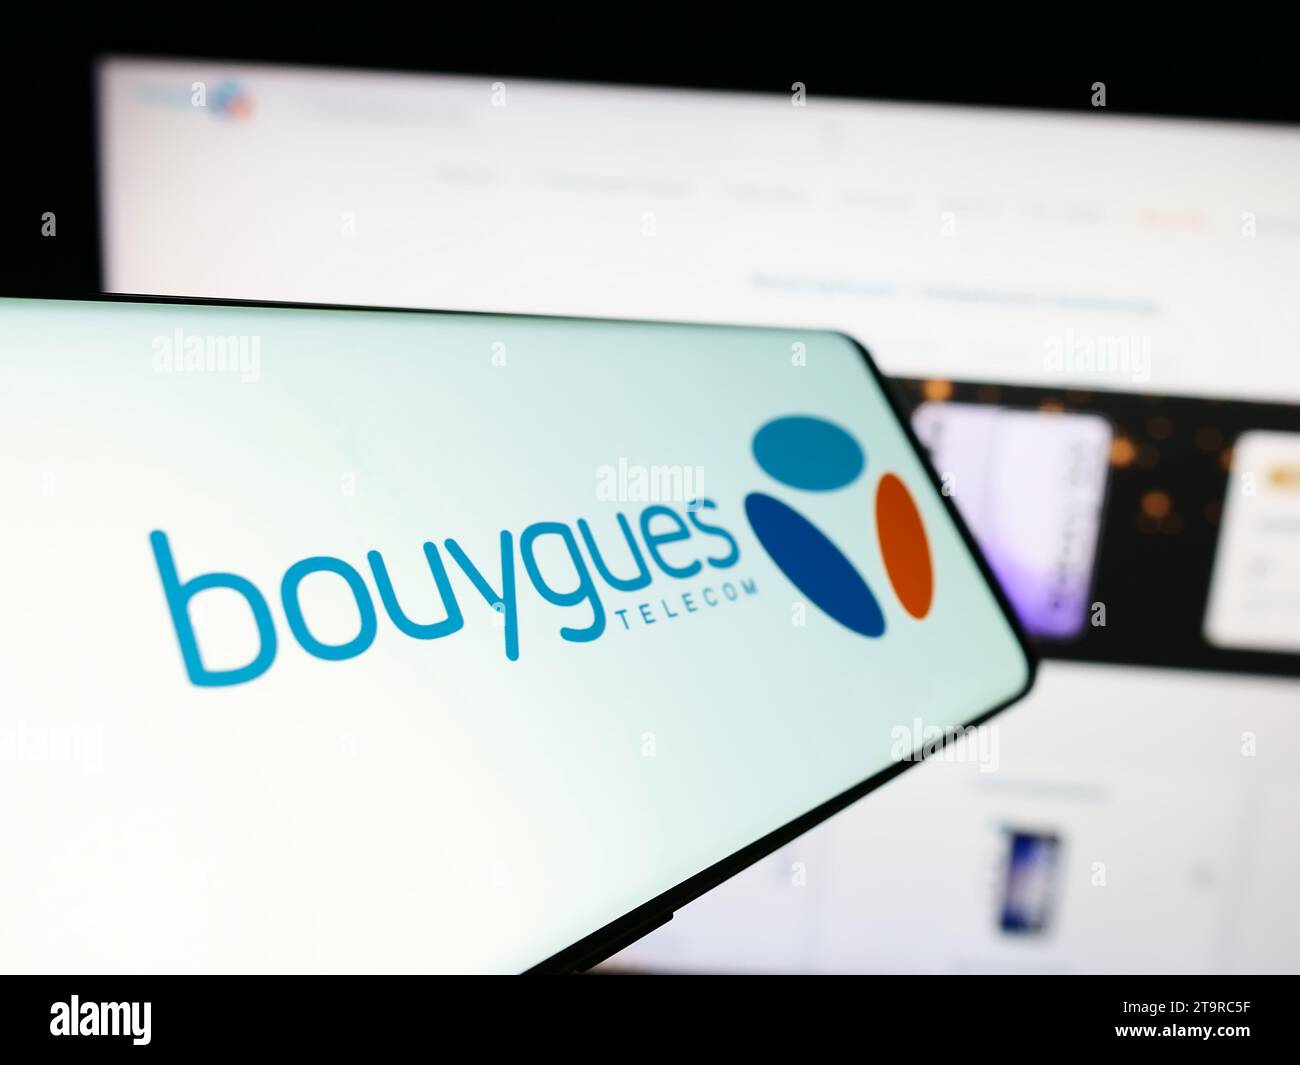 Smartphone with logo of French telecommunications company Bouygues Telecom S.A. in front of website. Focus on center-left of phone display. Stock Photo